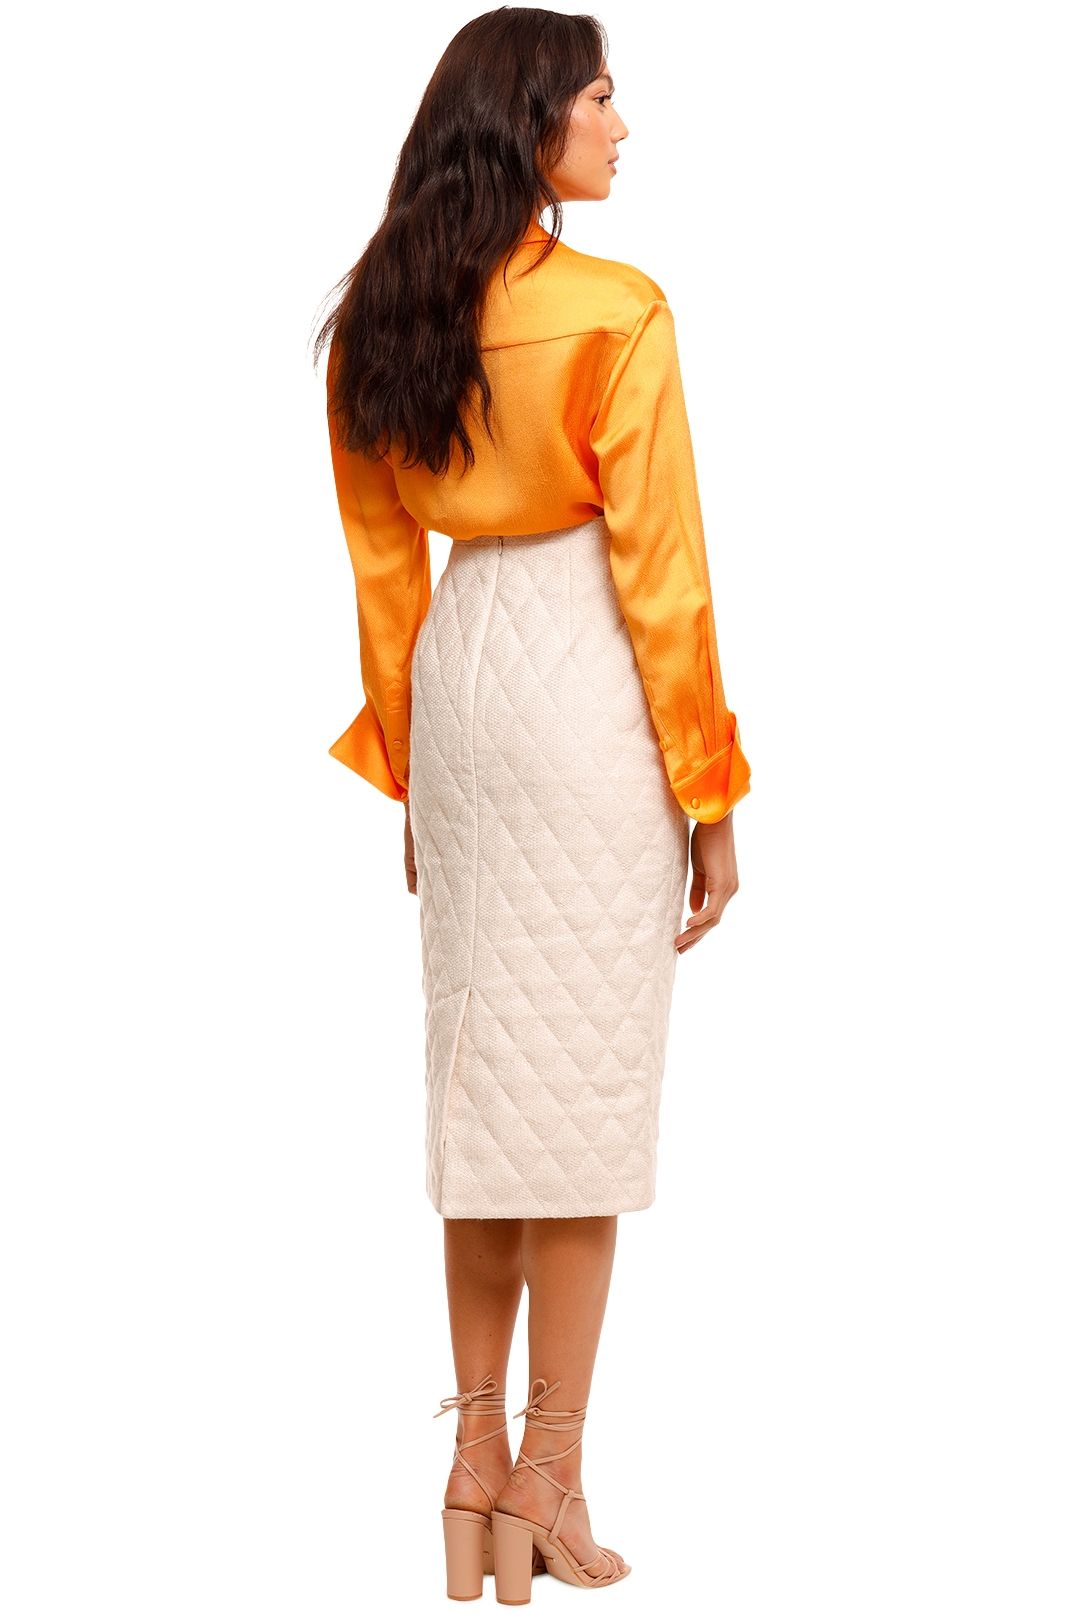 C&M Camilla And Marc Ace Skirt pencil